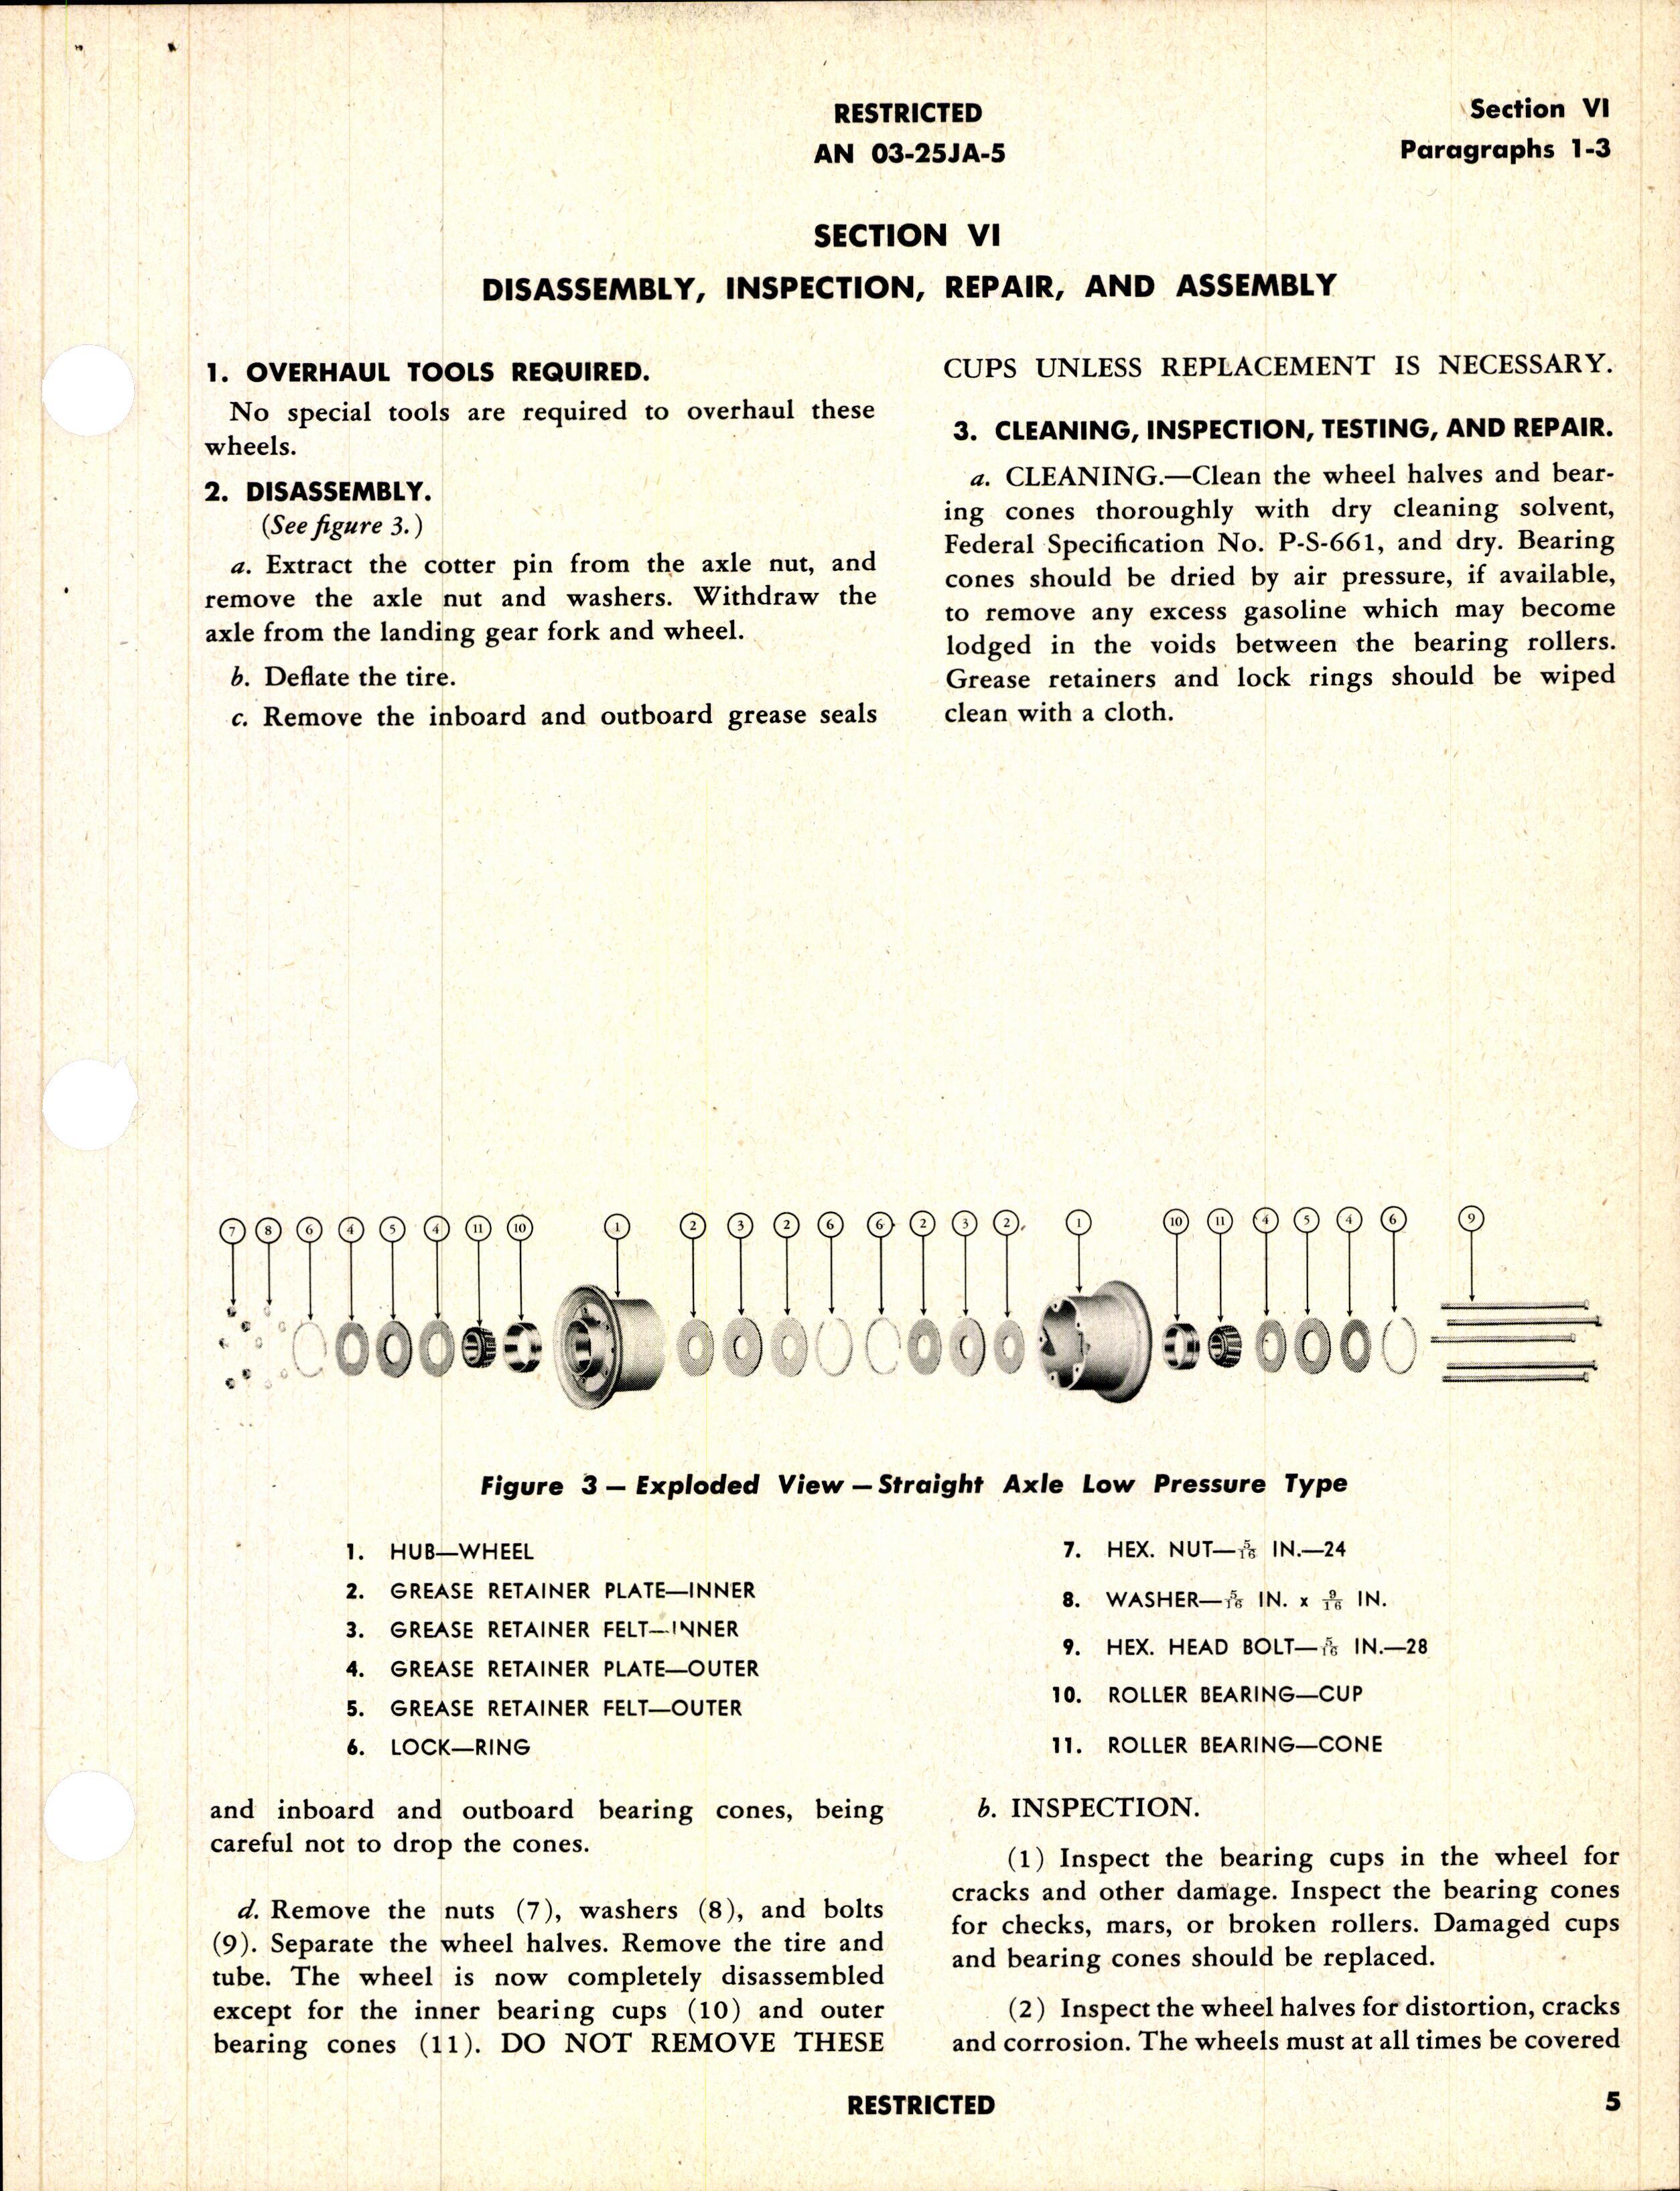 Sample page 9 from AirCorps Library document: Operation, Service & Overhaul Instructions with Parts Catalog for Low Pressure Tail Wheels